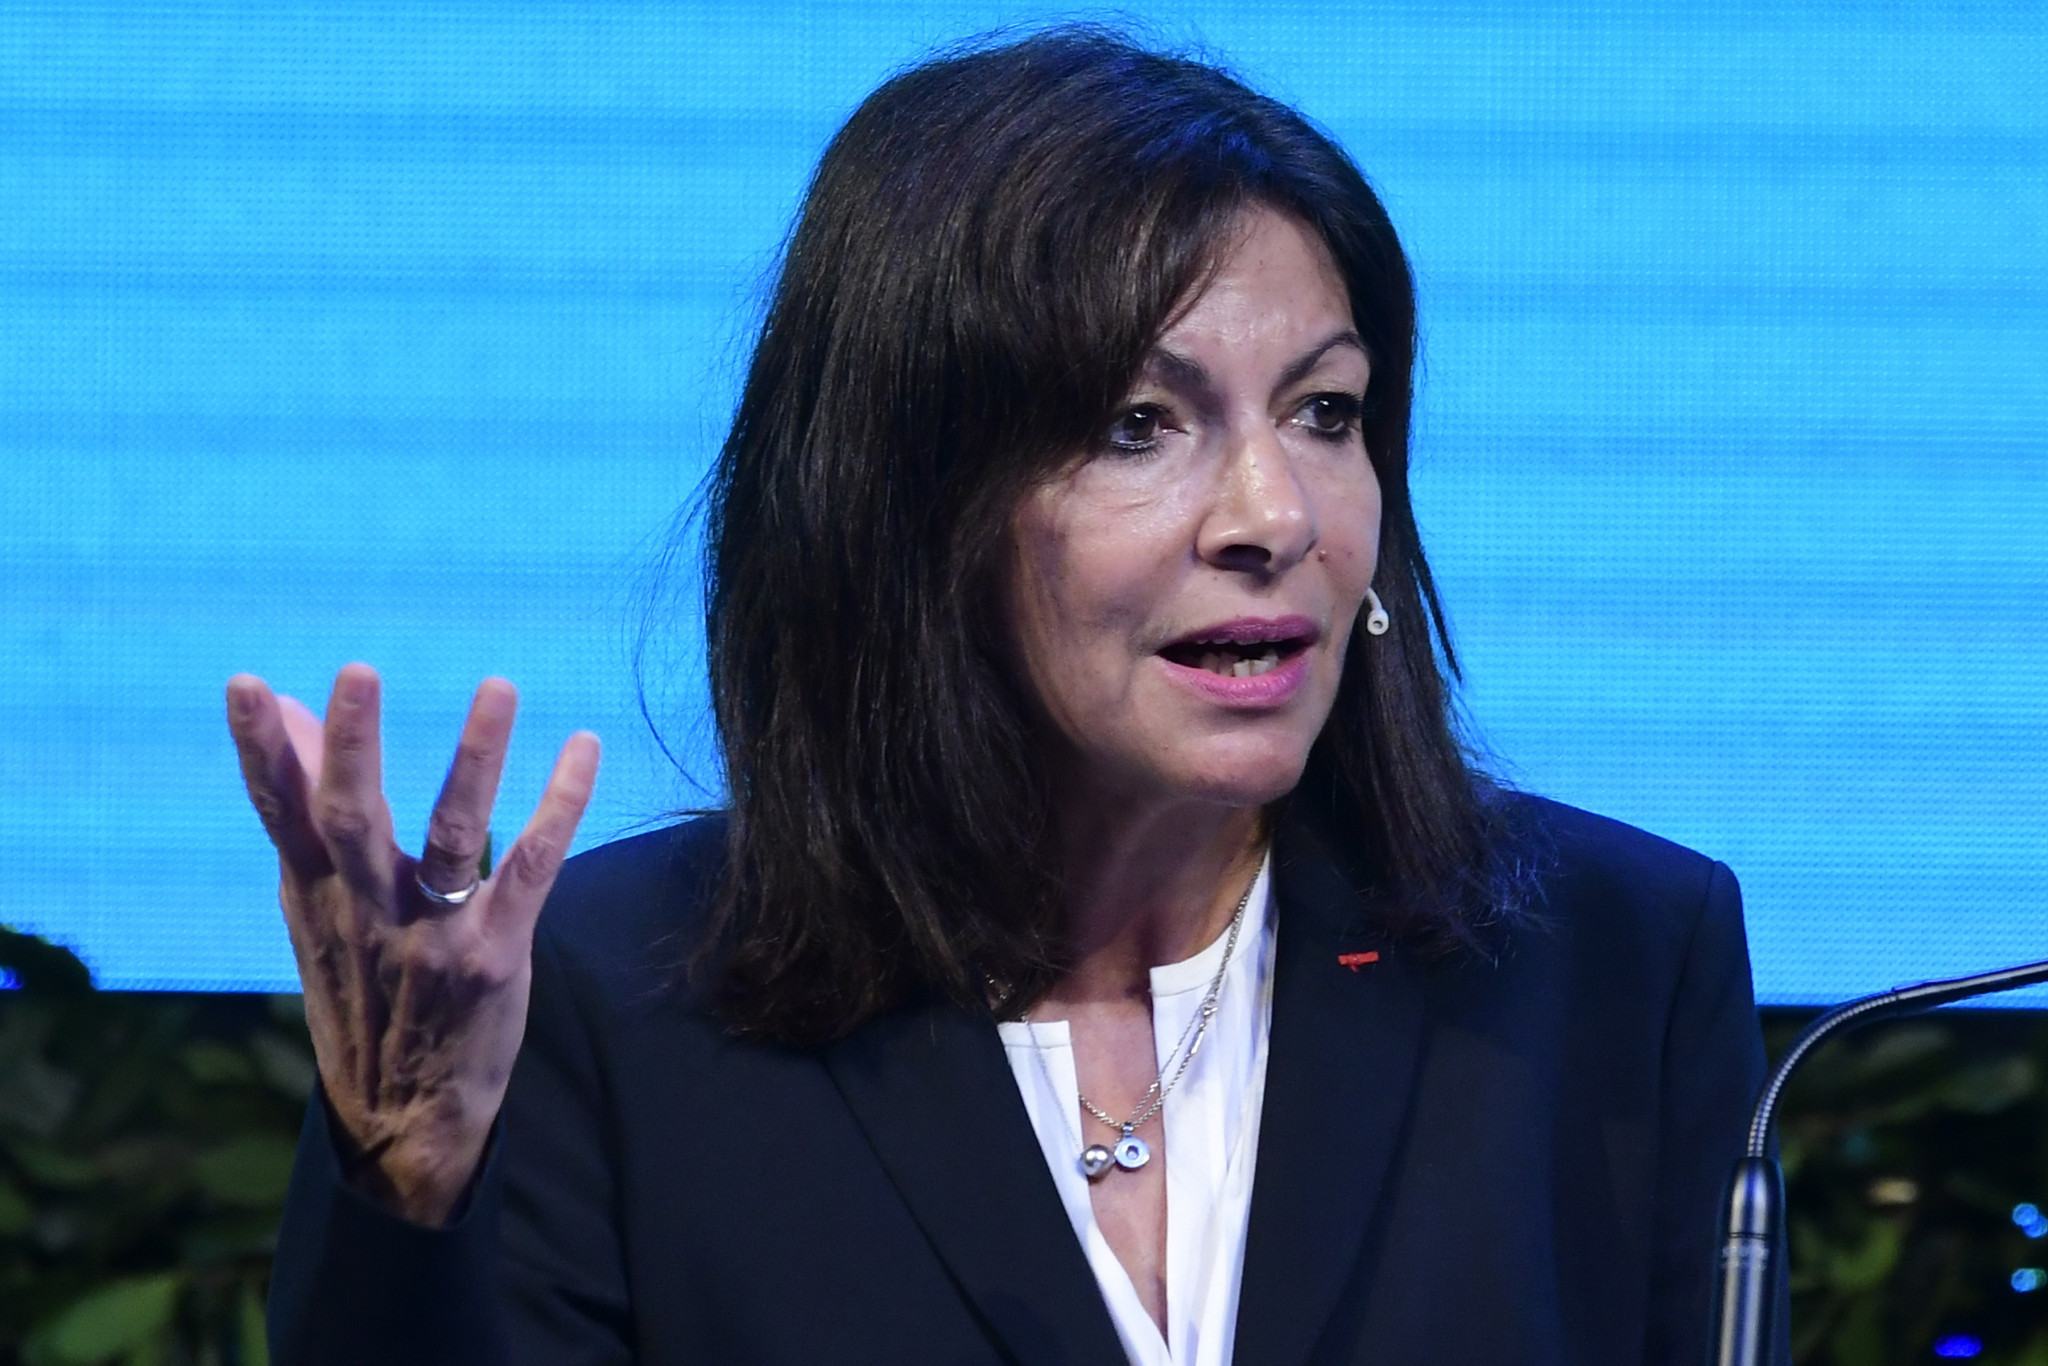 Paris Mayor Anne Hidalgo says she does not want a Russian delegation at the 2024 Olympics while the war continues in Ukraine ©Getty Images